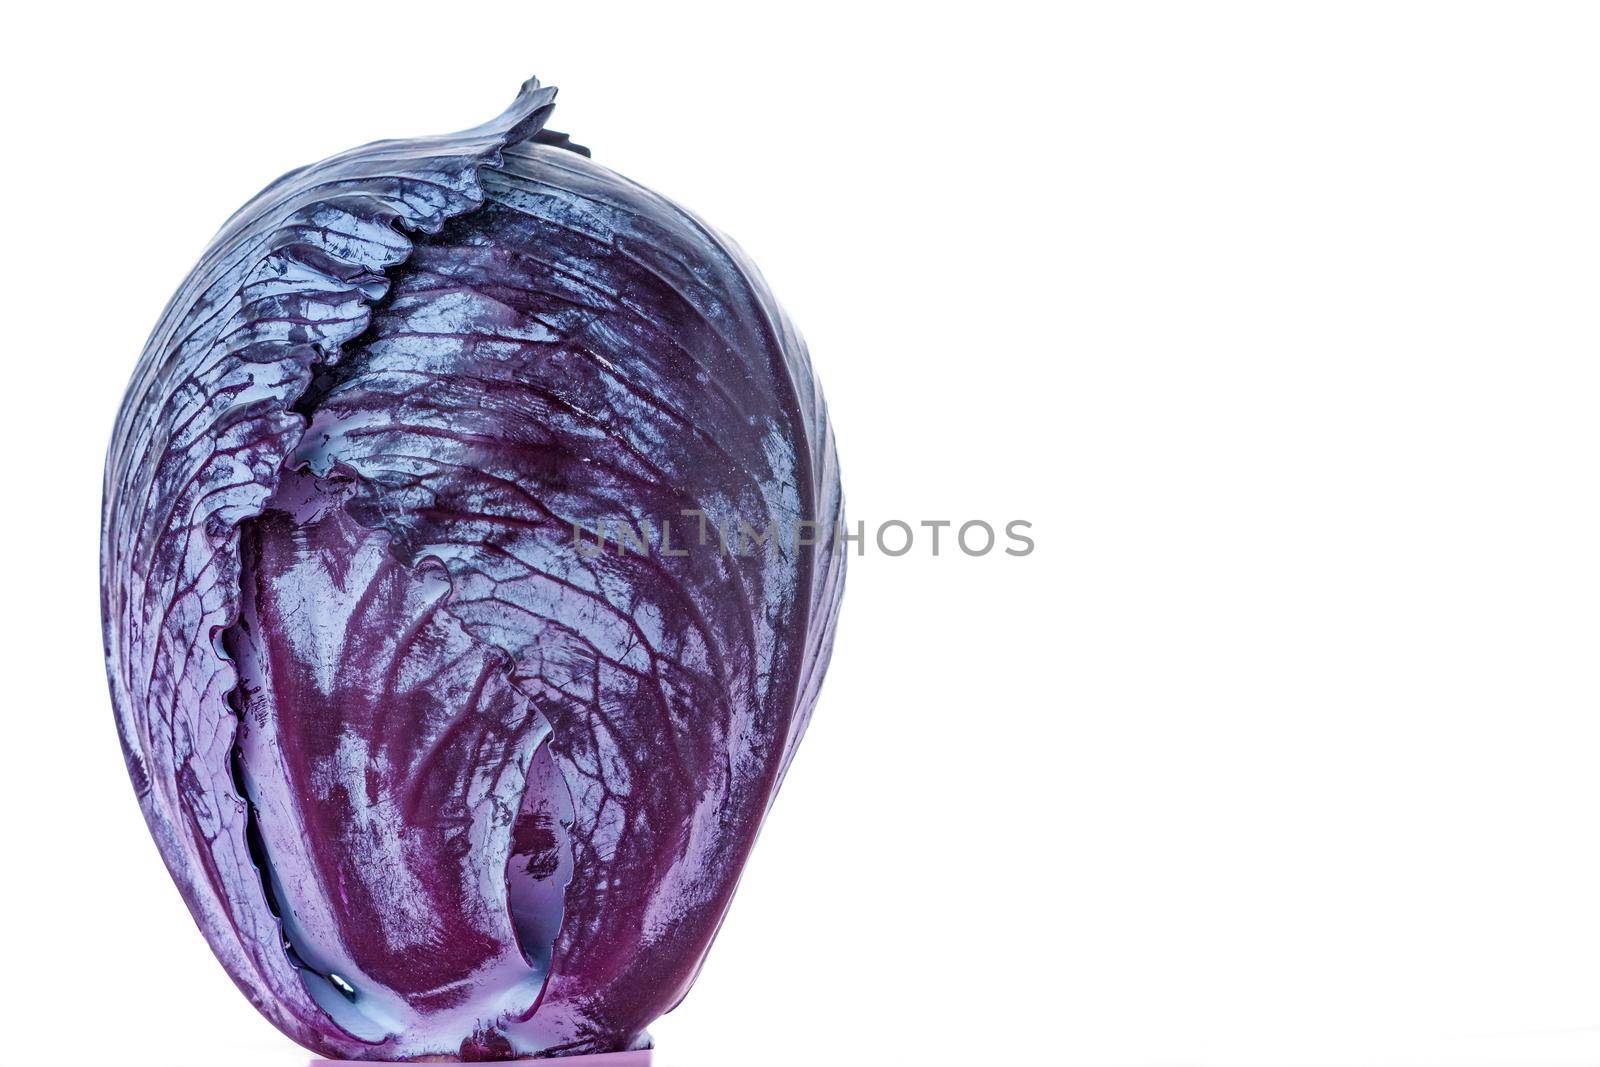 purple cabbage or red cabbage isolate by joseantona